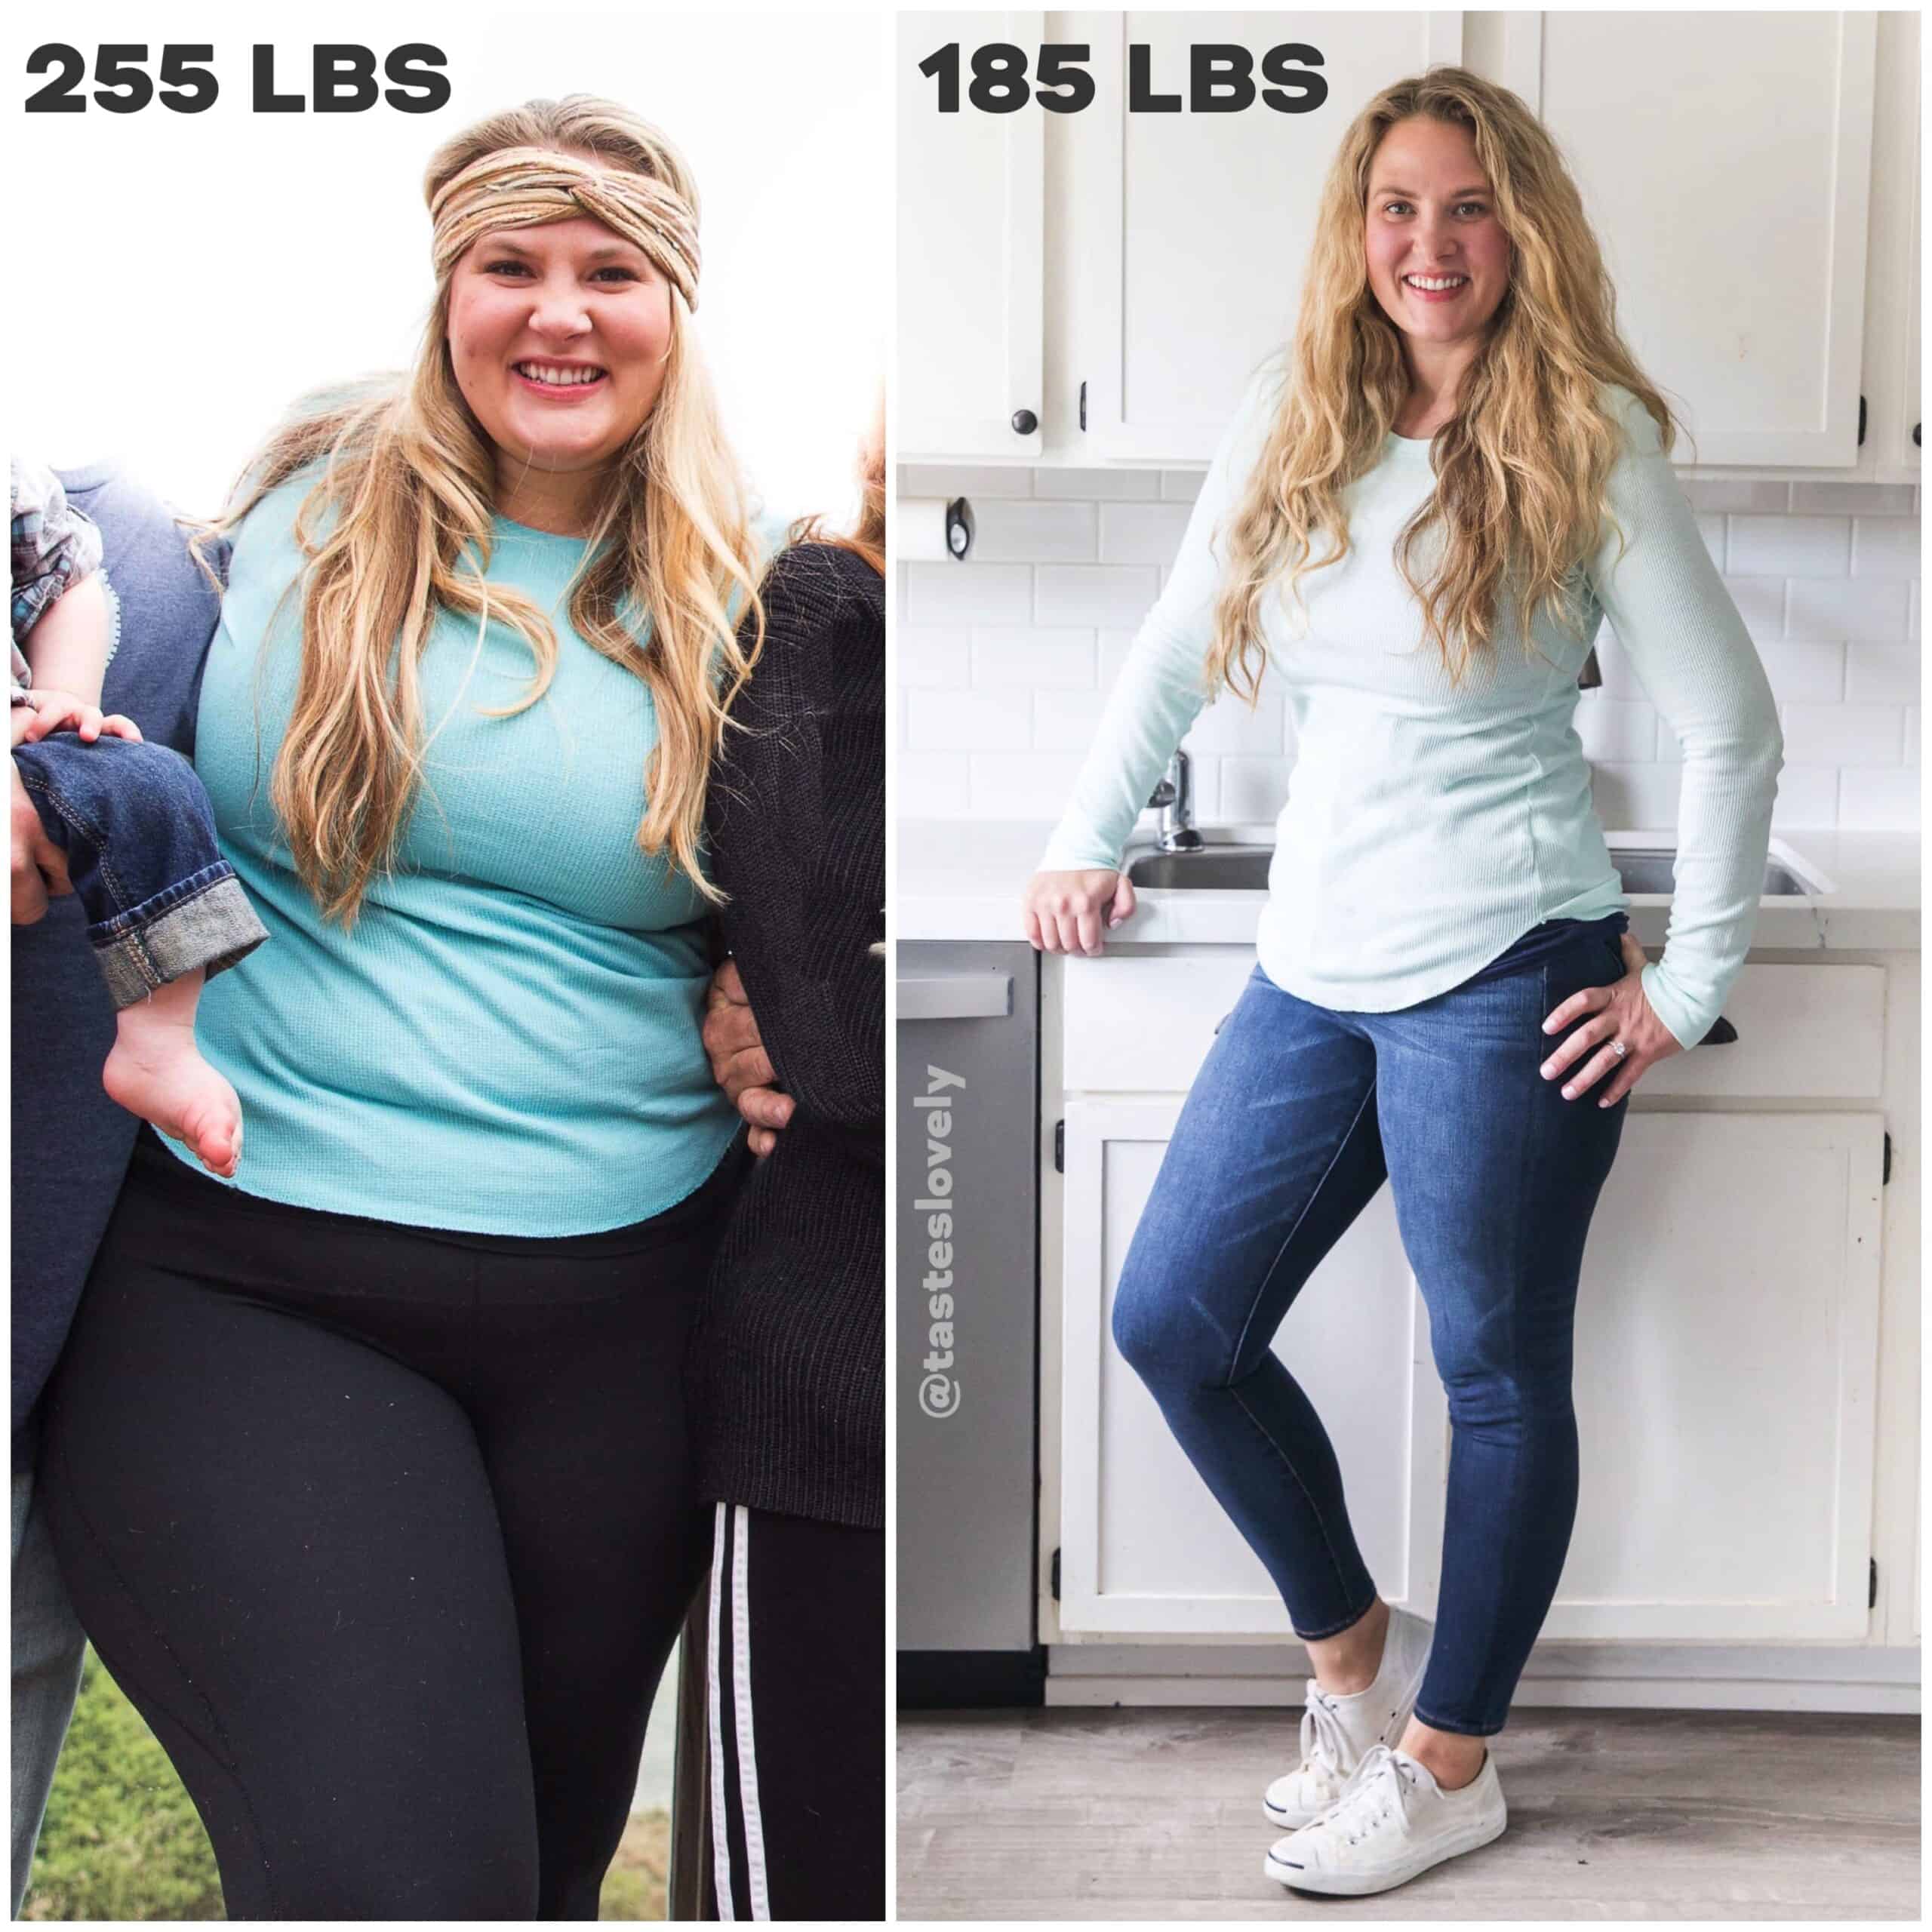 two side by side photos showing before and after weight loss 